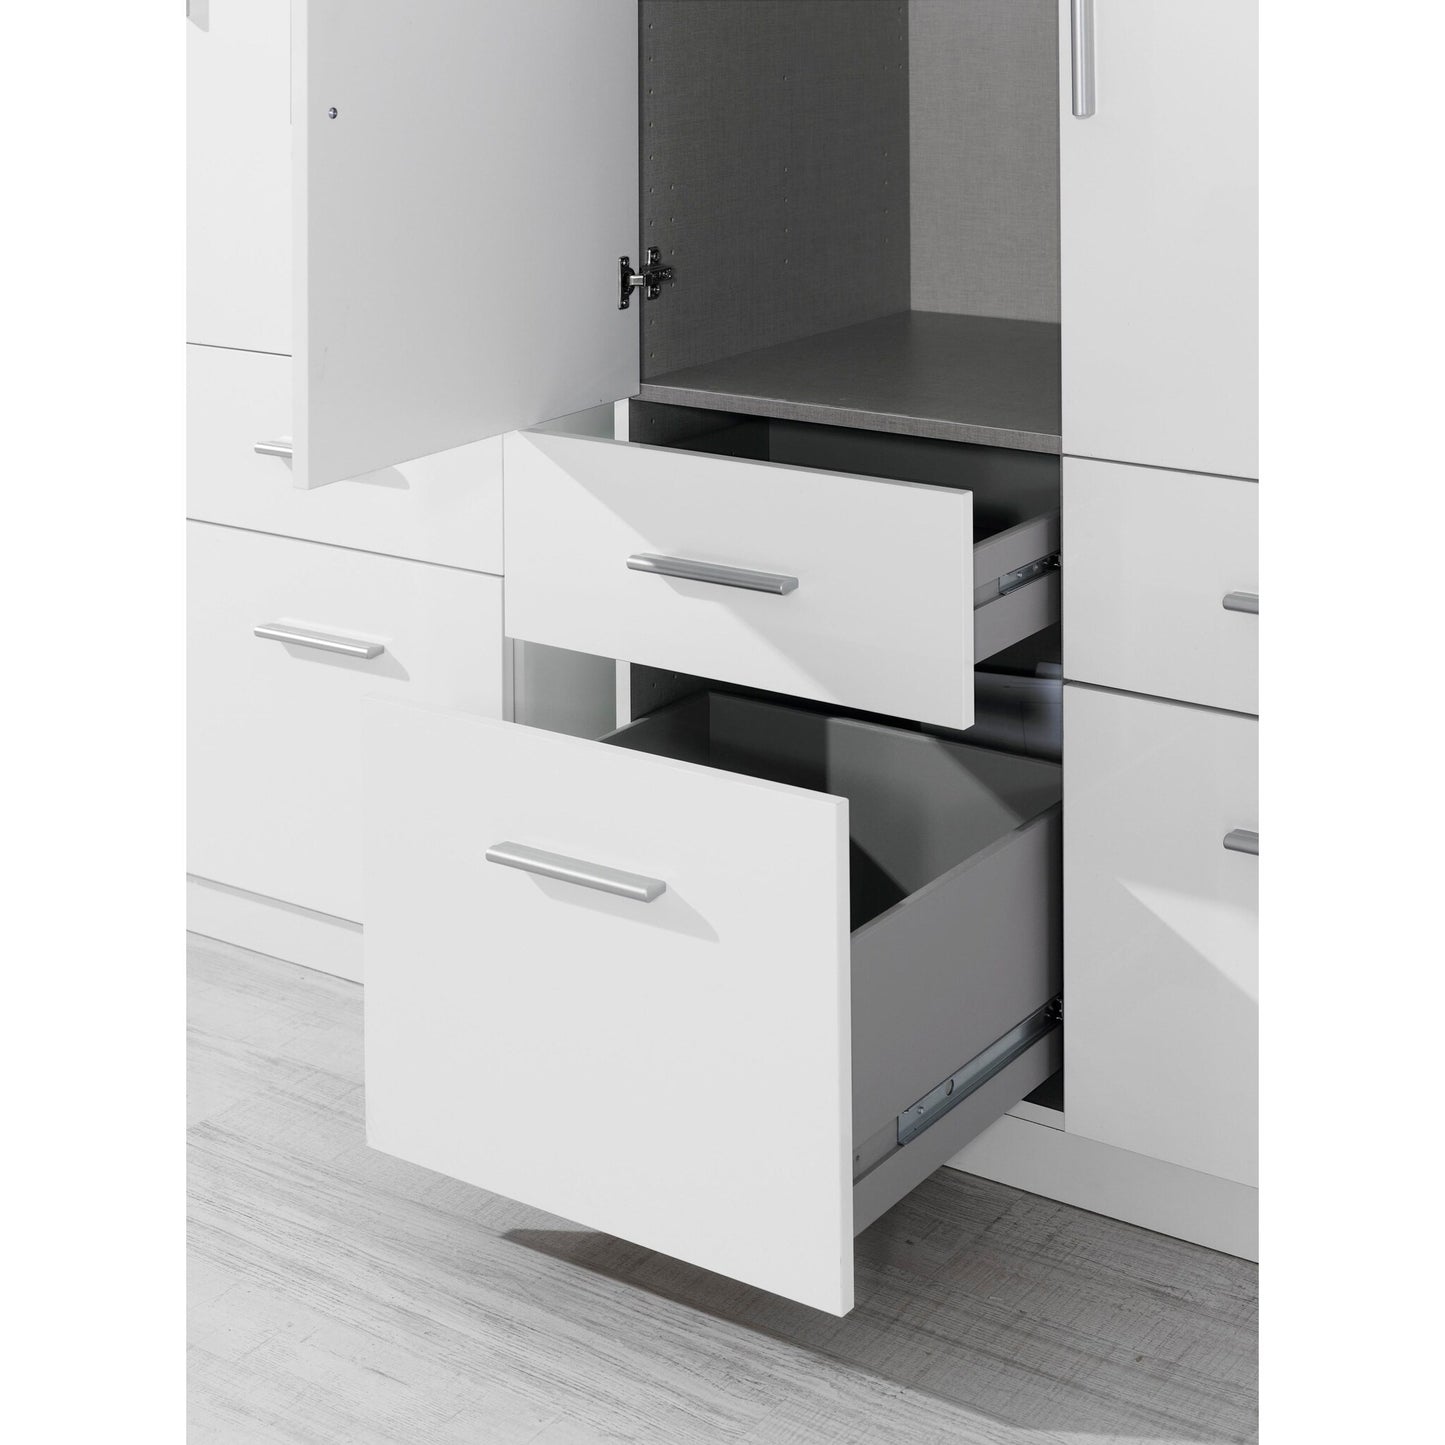 Rauch Celle High Gloss White 3 Door Wardrobe with Drawers